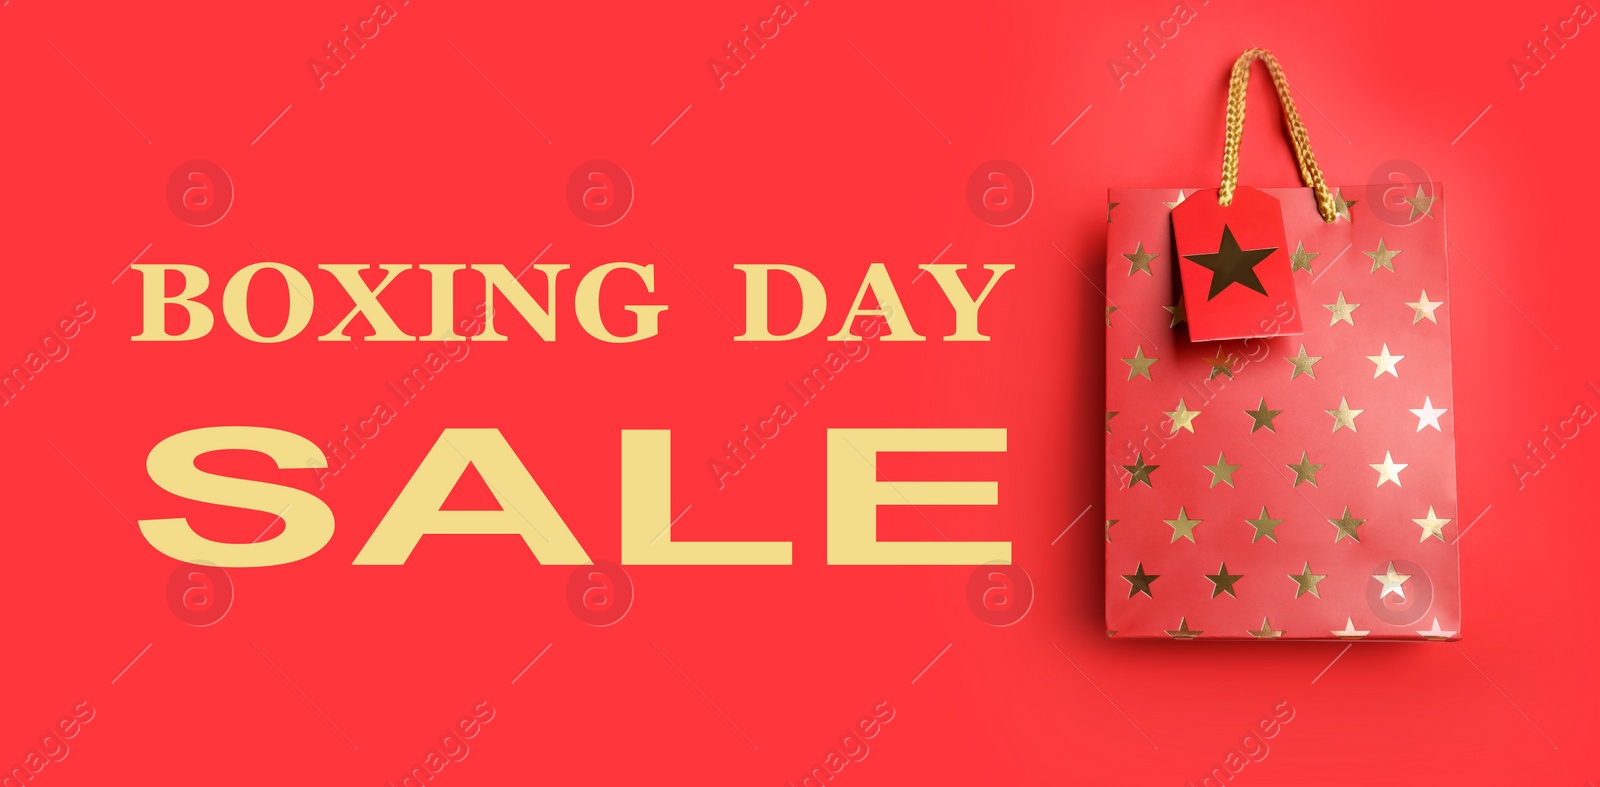 Image of Boxing day sale. Shopping bag on red background, banner design